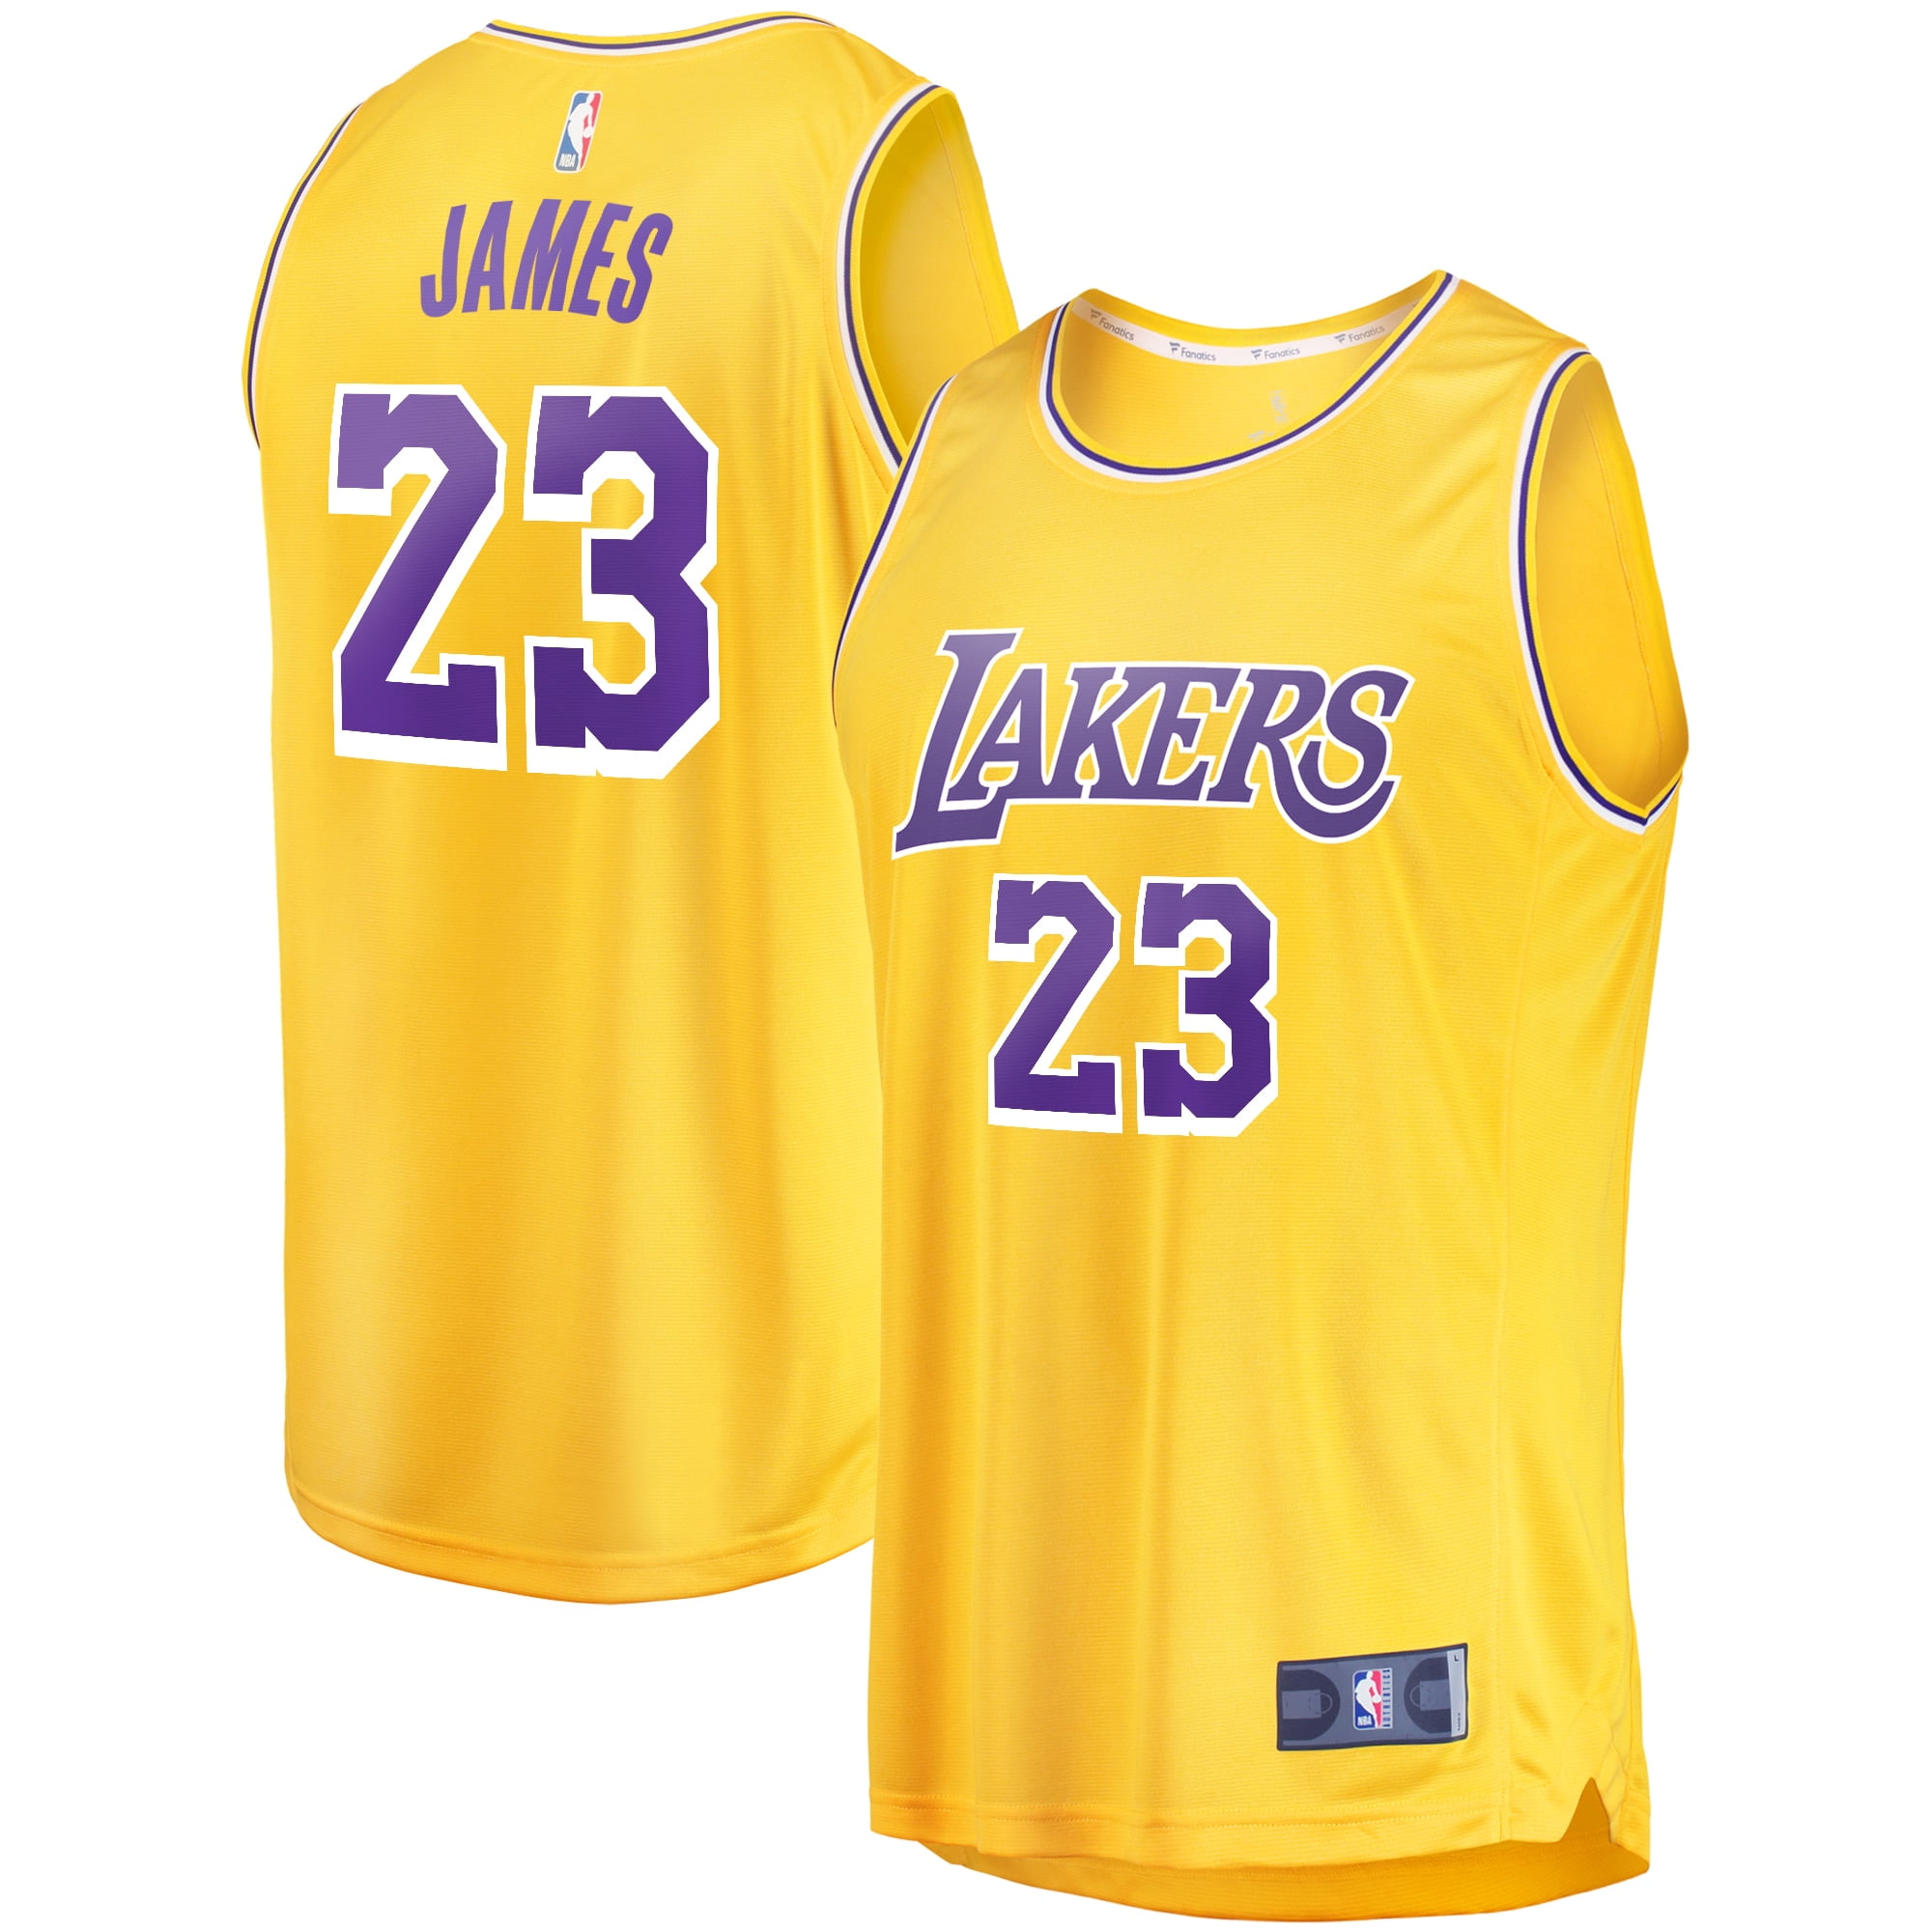 lebron james jersey in store